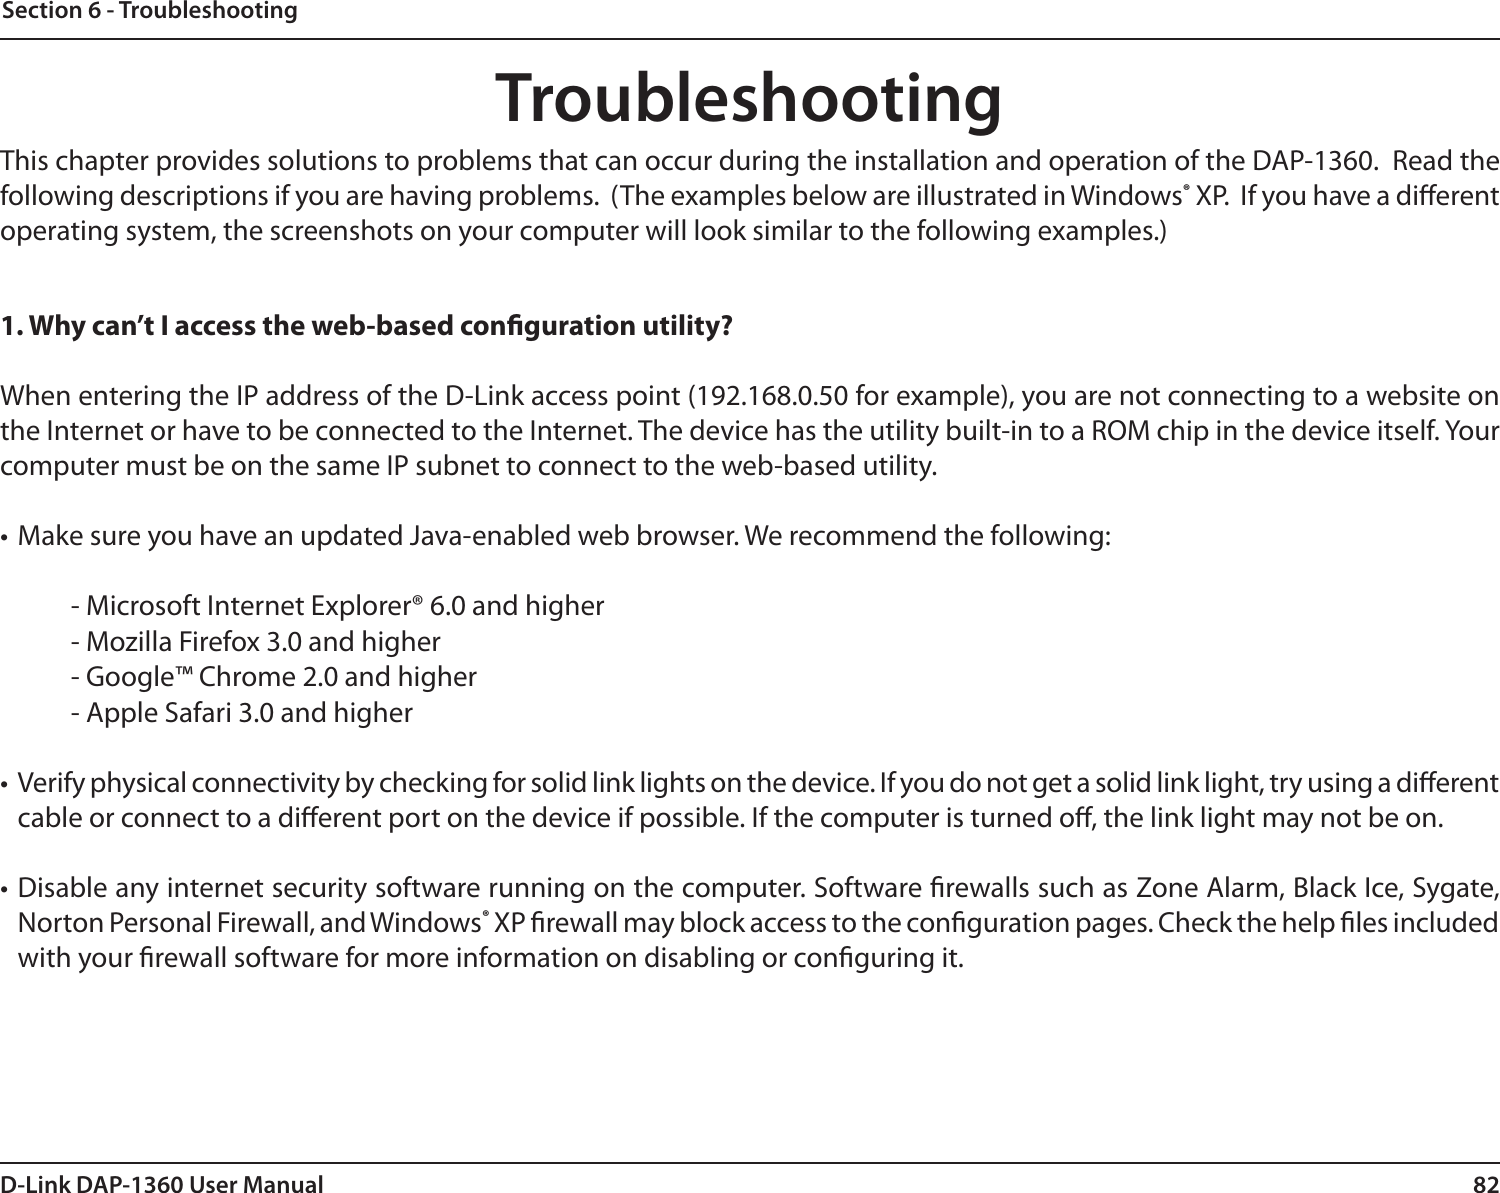 82D-Link DAP-1360 User ManualSection 6 - TroubleshootingTroubleshootingThis chapter provides solutions to problems that can occur during the installation and operation of the DAP-1360.  Read the following descriptions if you are having problems.  (The examples below are illustrated in Windows® XP.  If you have a dierent operating system, the screenshots on your computer will look similar to the following examples.)1. Why can’t I access the web-based conguration utility?When entering the IP address of the D-Link access point (192.168.0.50 for example), you are not connecting to a website on the Internet or have to be connected to the Internet. The device has the utility built-in to a ROM chip in the device itself. Your computer must be on the same IP subnet to connect to the web-based utility. • Make sure you have an updated Java-enabled web browser. We recommend the following: - Microsoft Internet Explorer® 6.0 and higher- Mozilla Firefox 3.0 and higher- Google™ Chrome 2.0 and higher- Apple Safari 3.0 and higher• Verify physical connectivity by checking for solid link lights on the device. If you do not get a solid link light, try using a dierent cable or connect to a dierent port on the device if possible. If the computer is turned o, the link light may not be on.• Disable any internet security software running on the computer. Software rewalls such as Zone Alarm, Black Ice, Sygate, Norton Personal Firewall, and Windows® XP rewall may block access to the conguration pages. Check the help les included with your rewall software for more information on disabling or conguring it.